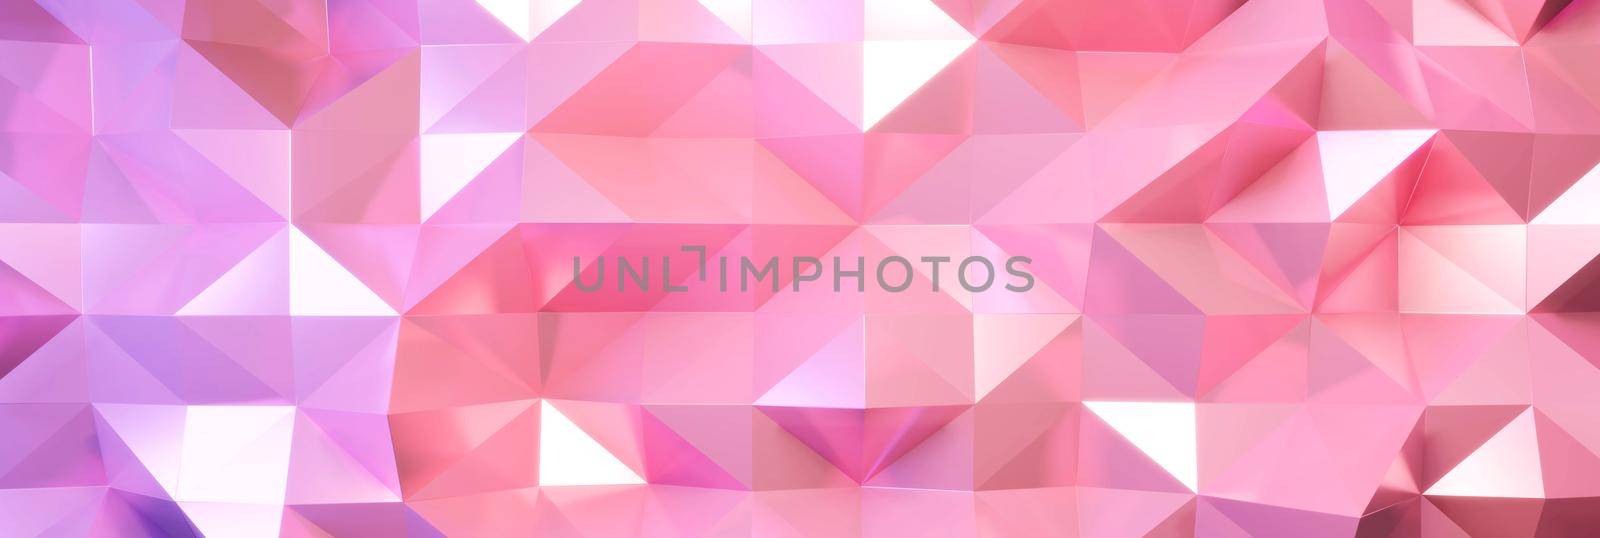 abstract geometric pattern background polygon background pink purple elegant style gradient background 3d rendering by noppha80